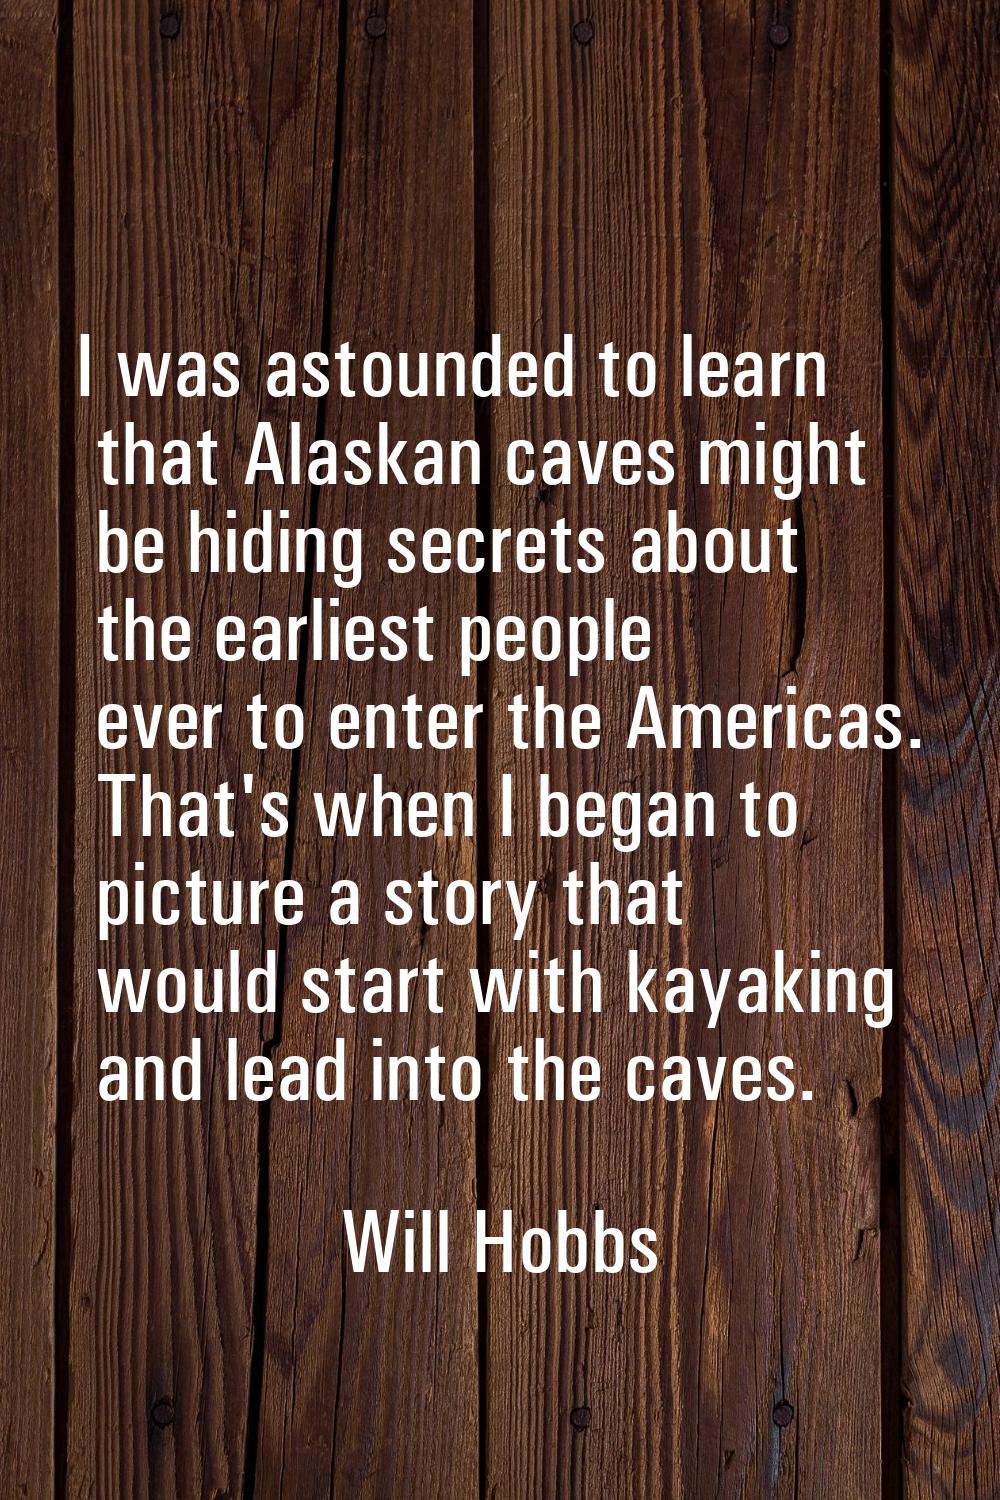 I was astounded to learn that Alaskan caves might be hiding secrets about the earliest people ever 